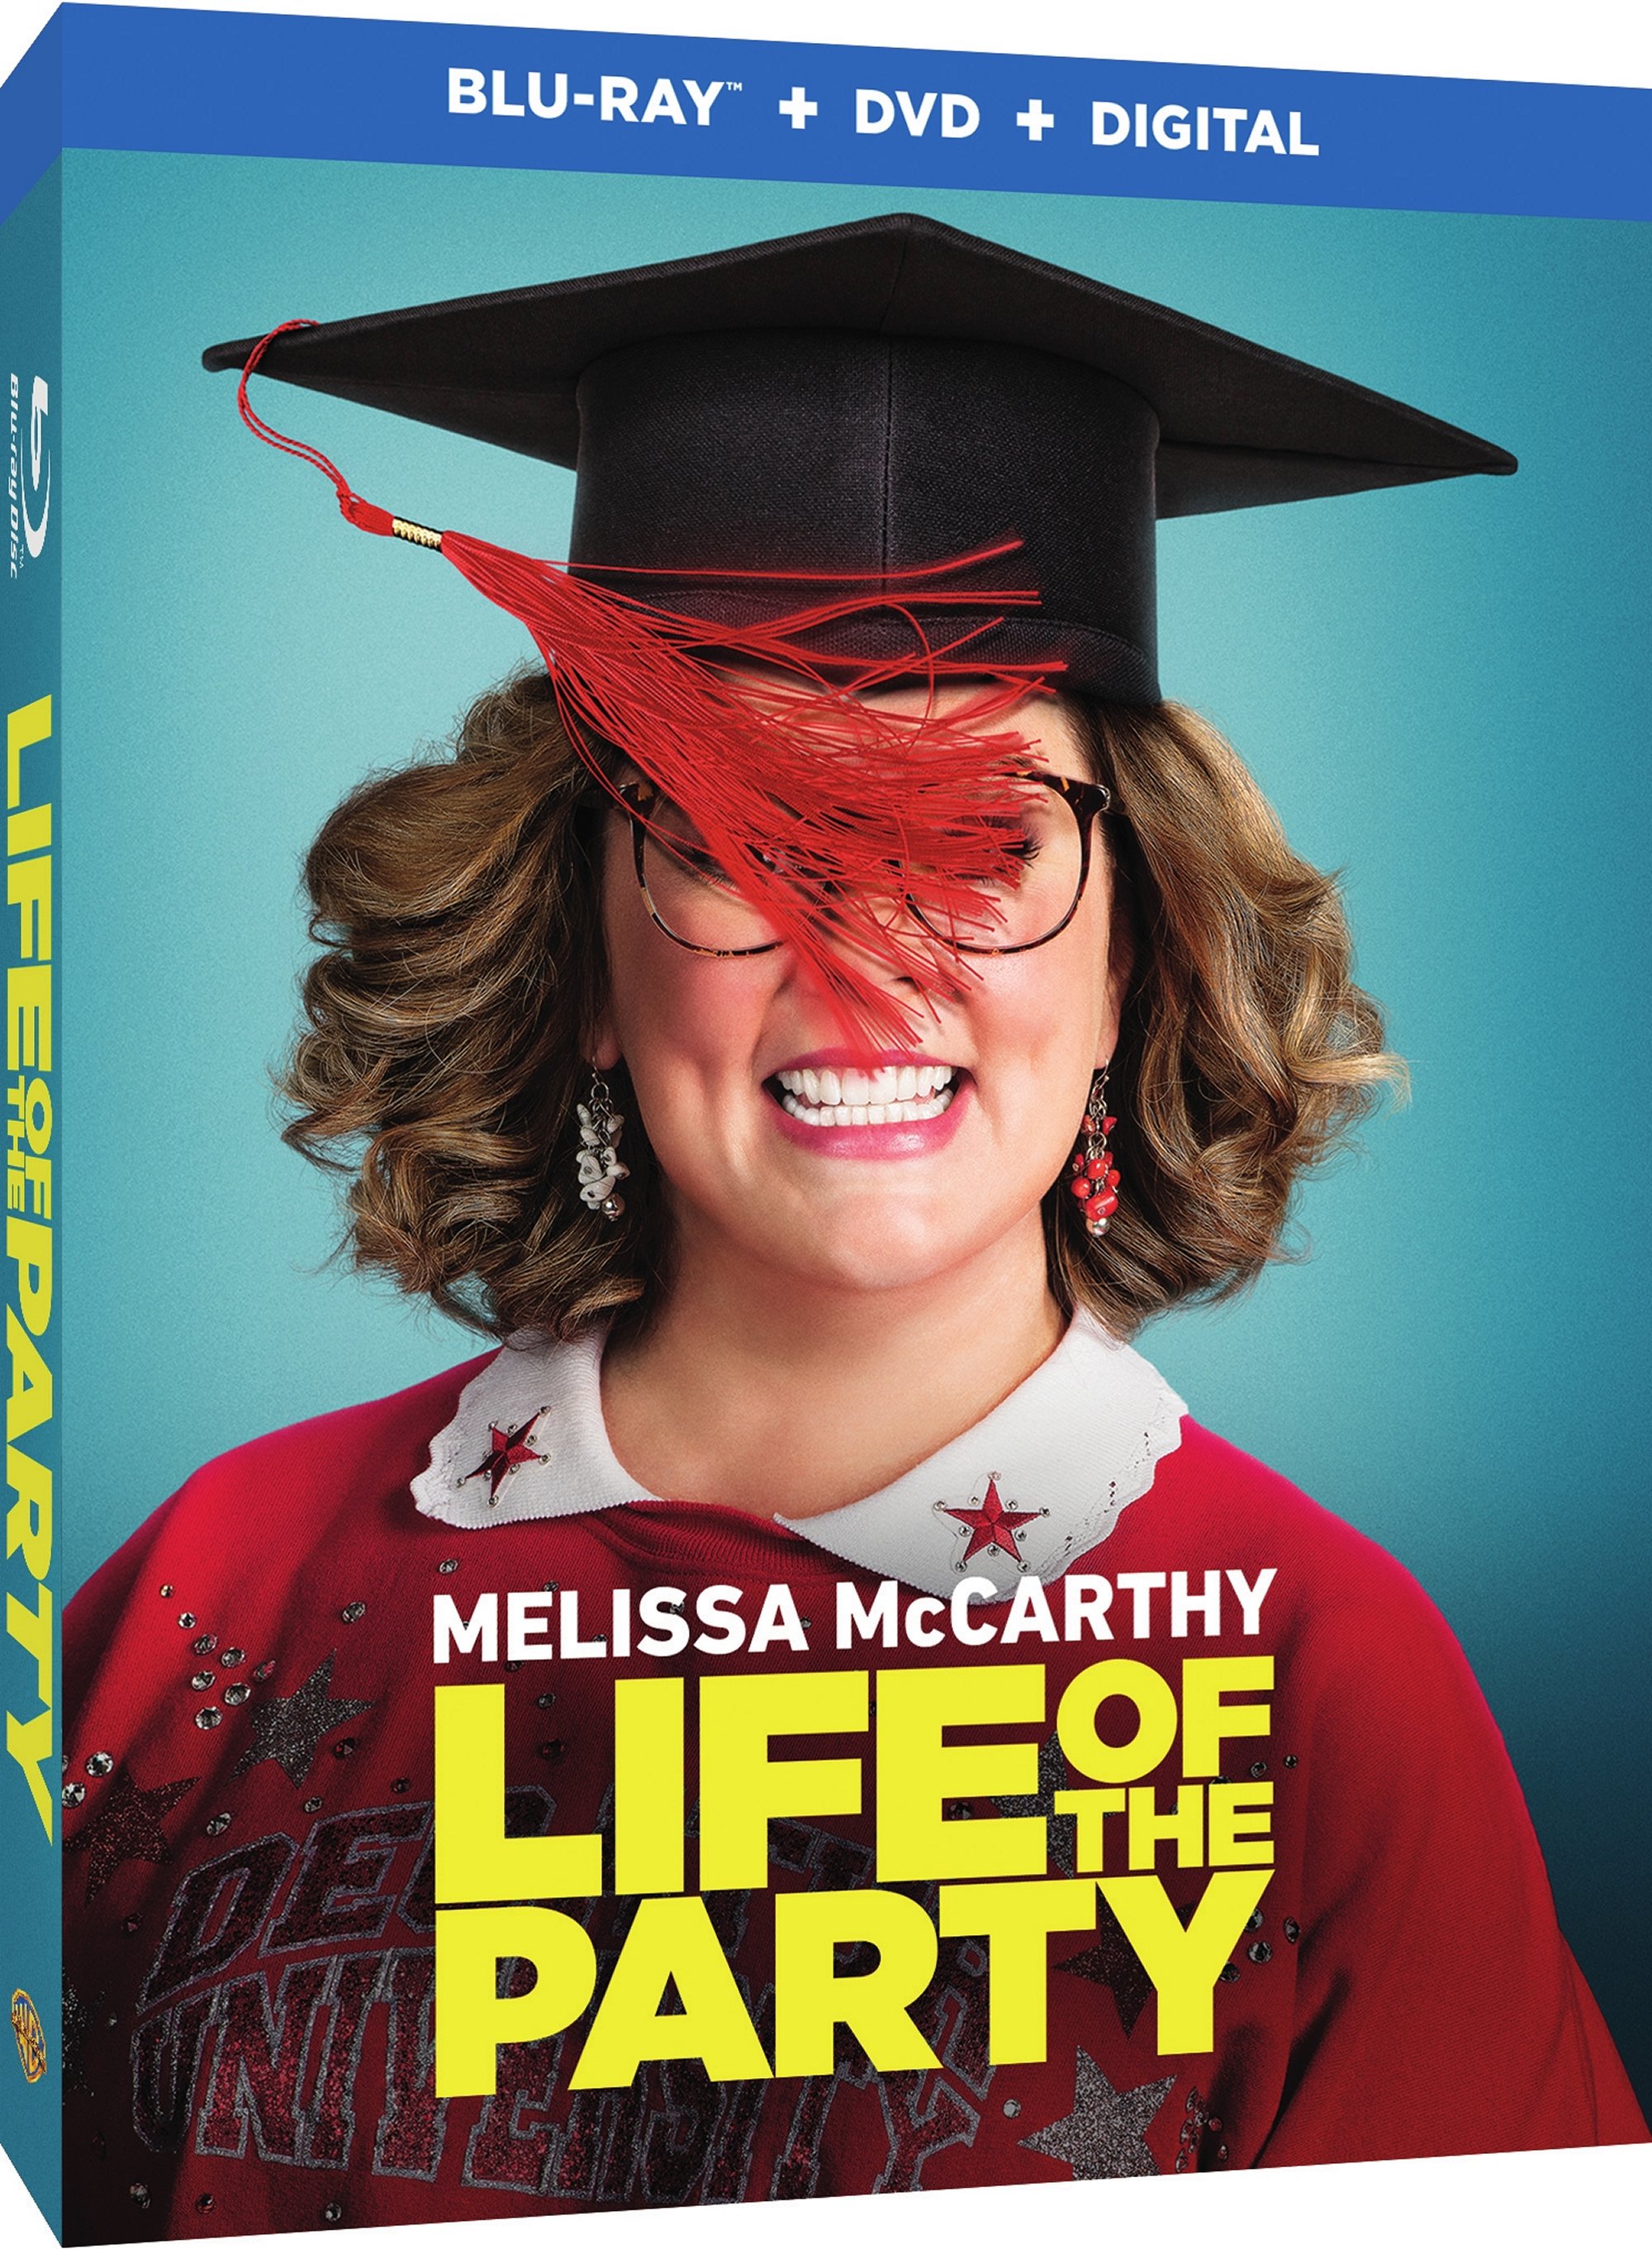 Life Of The Party Blu-Ray Combo Pack cover (Warner Bros. Home Entertainment)